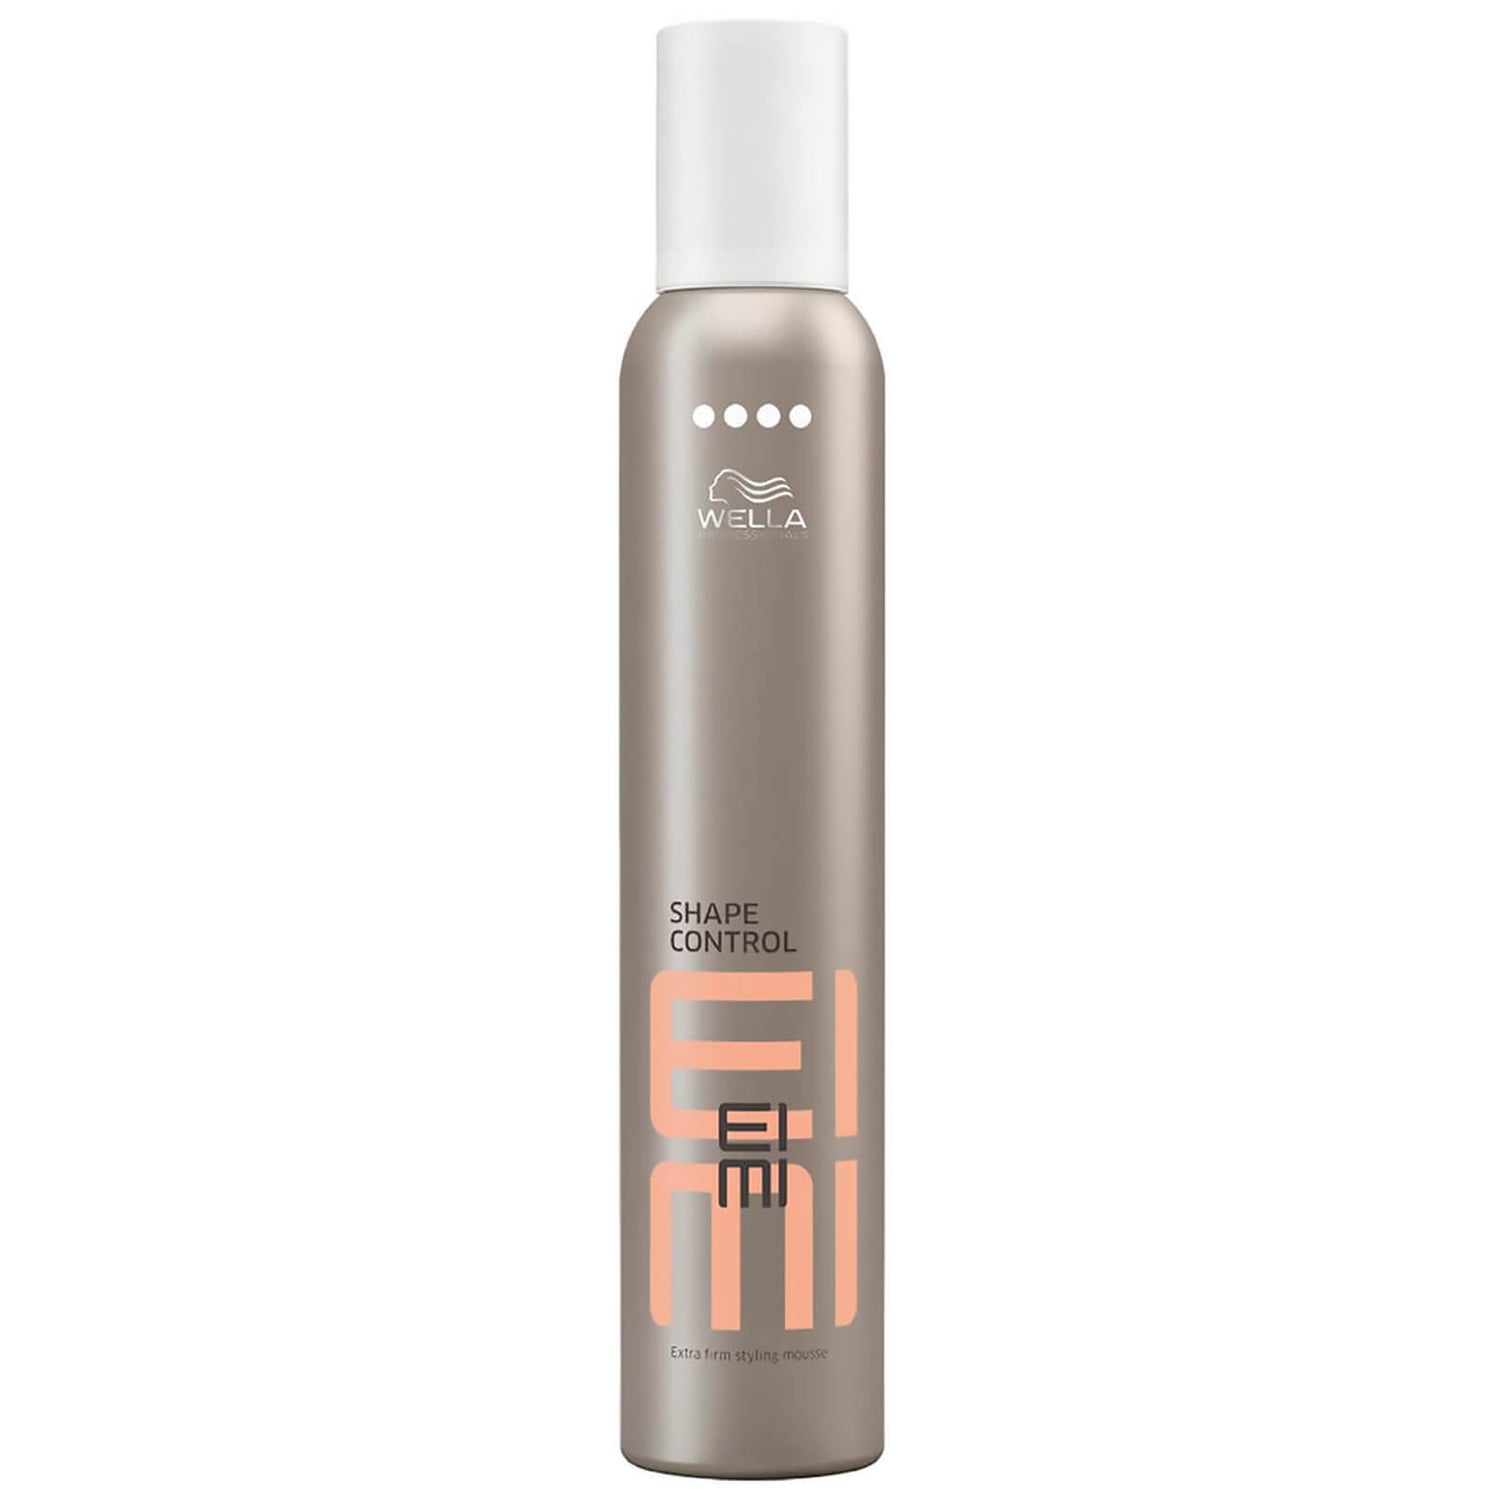 Wella Professionals Wet Shape Control Styling Mousse (300ml)